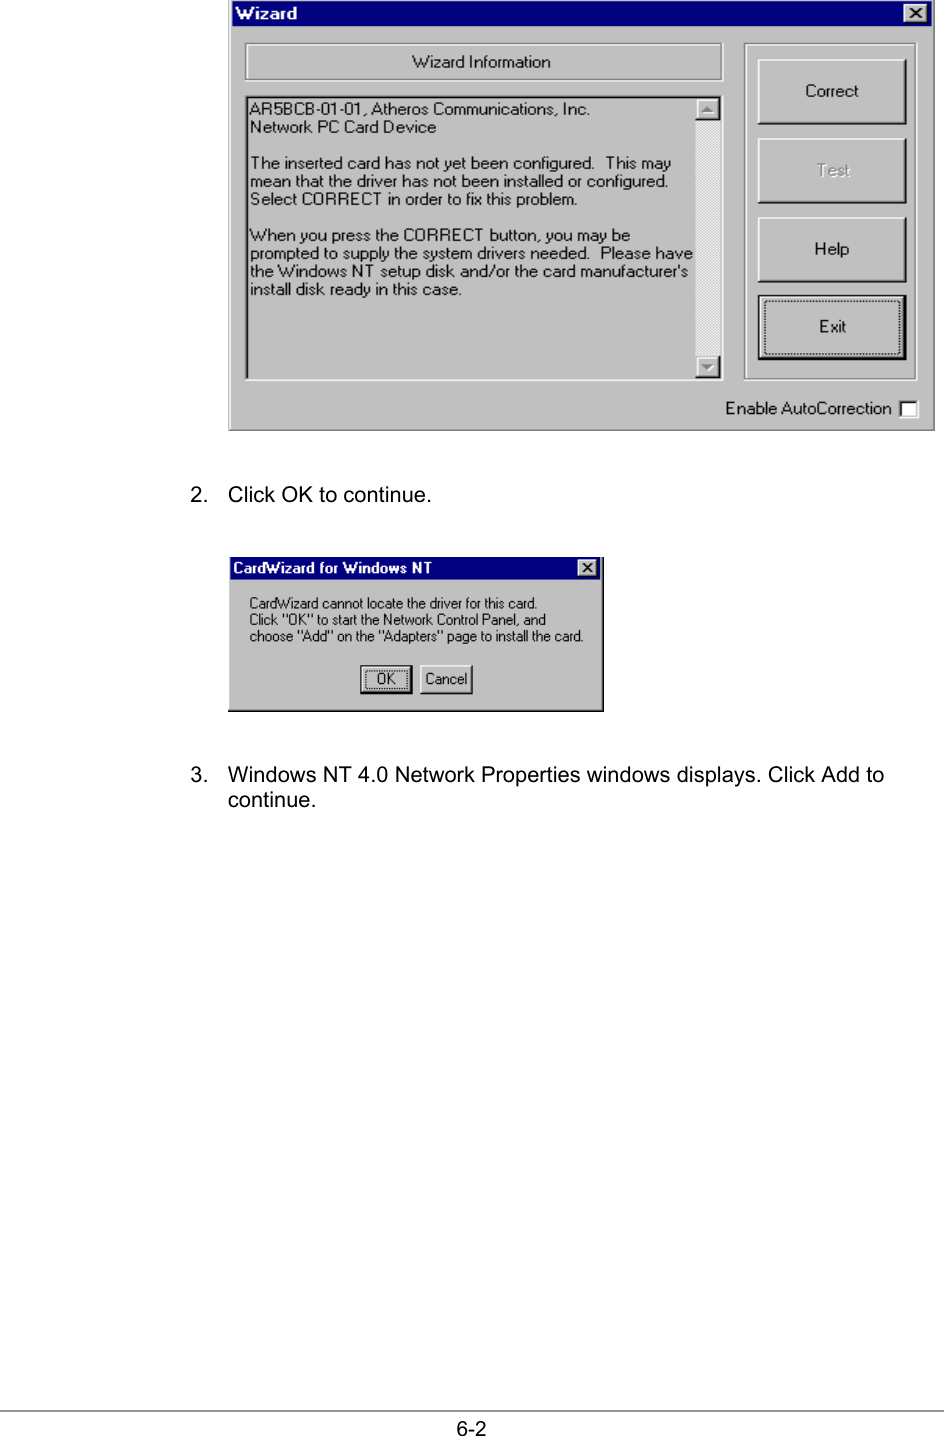  6-2   2.  Click OK to continue.   3.  Windows NT 4.0 Network Properties windows displays. Click Add to continue. 